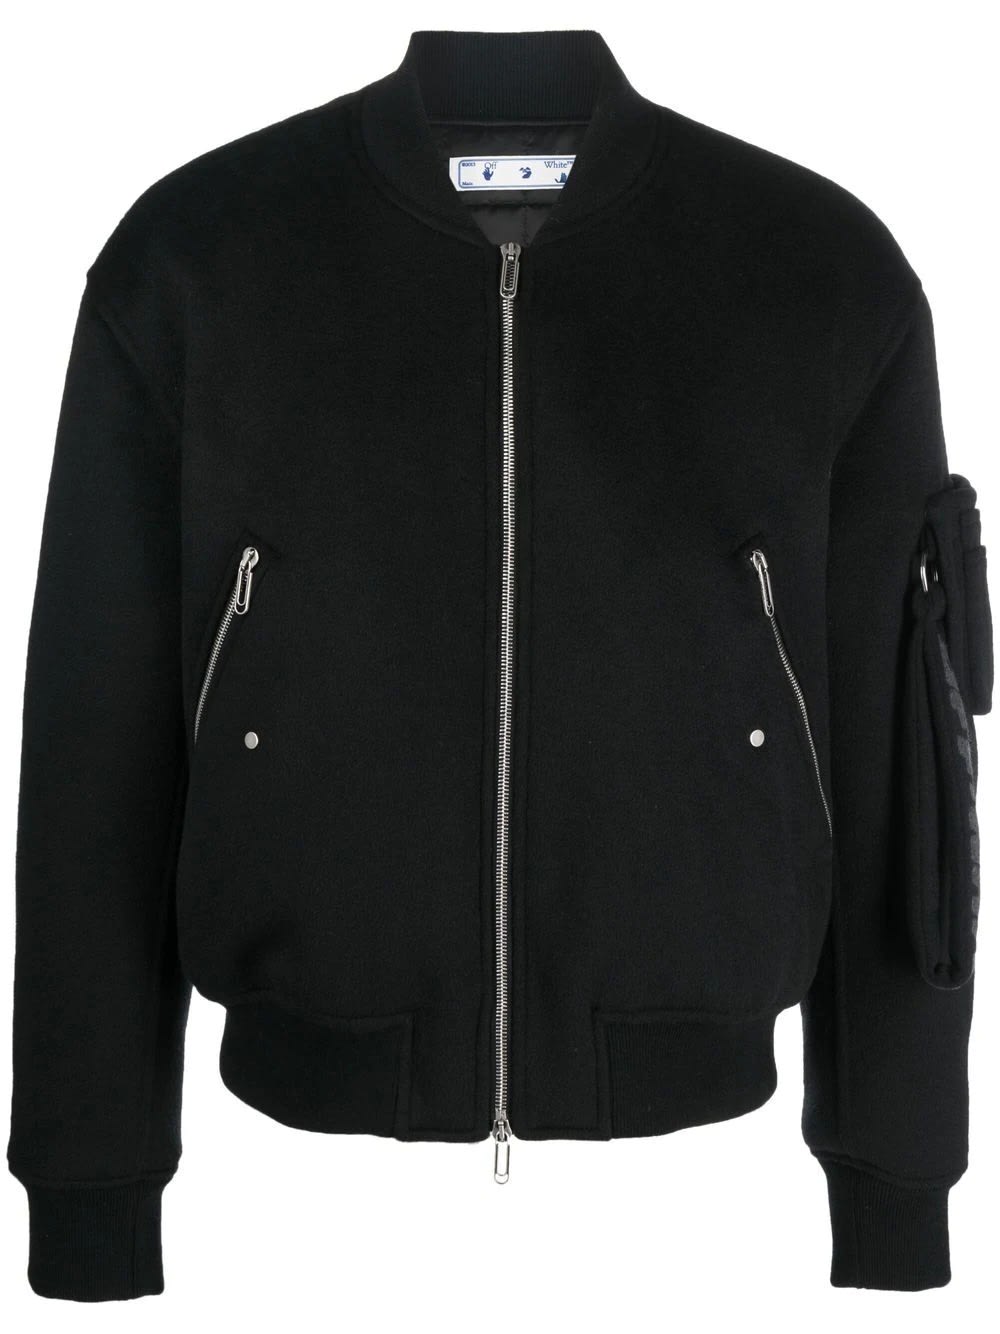 OFF-WHITE BLACK CASHMERE QUOTE BOMBER JACKET